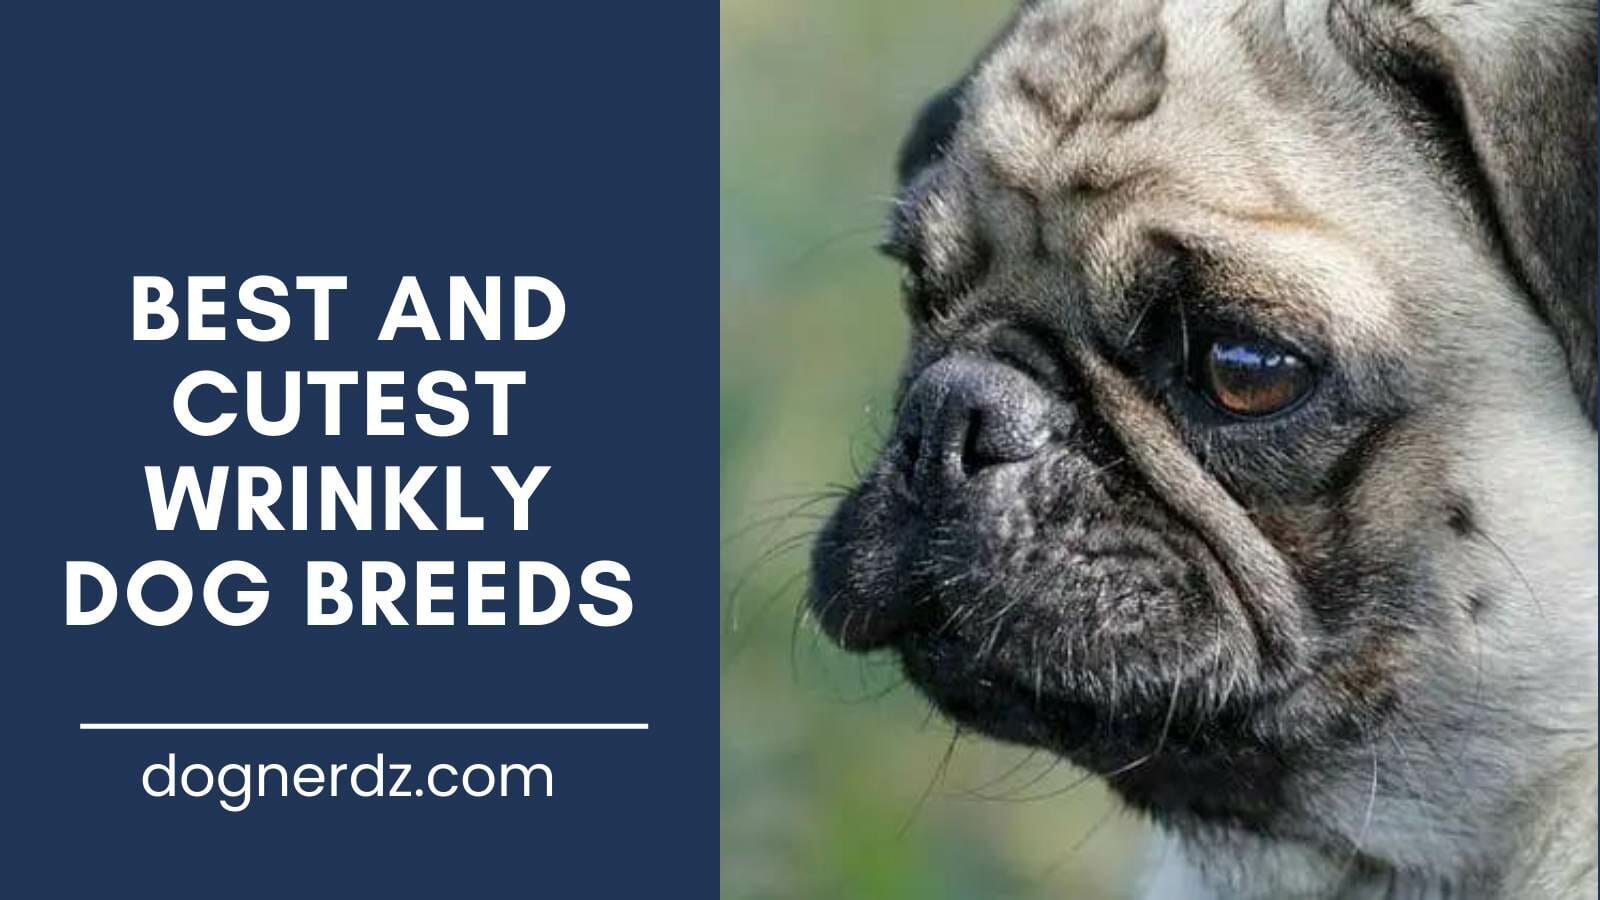 review of the best and cutest wrinkly dog breeds